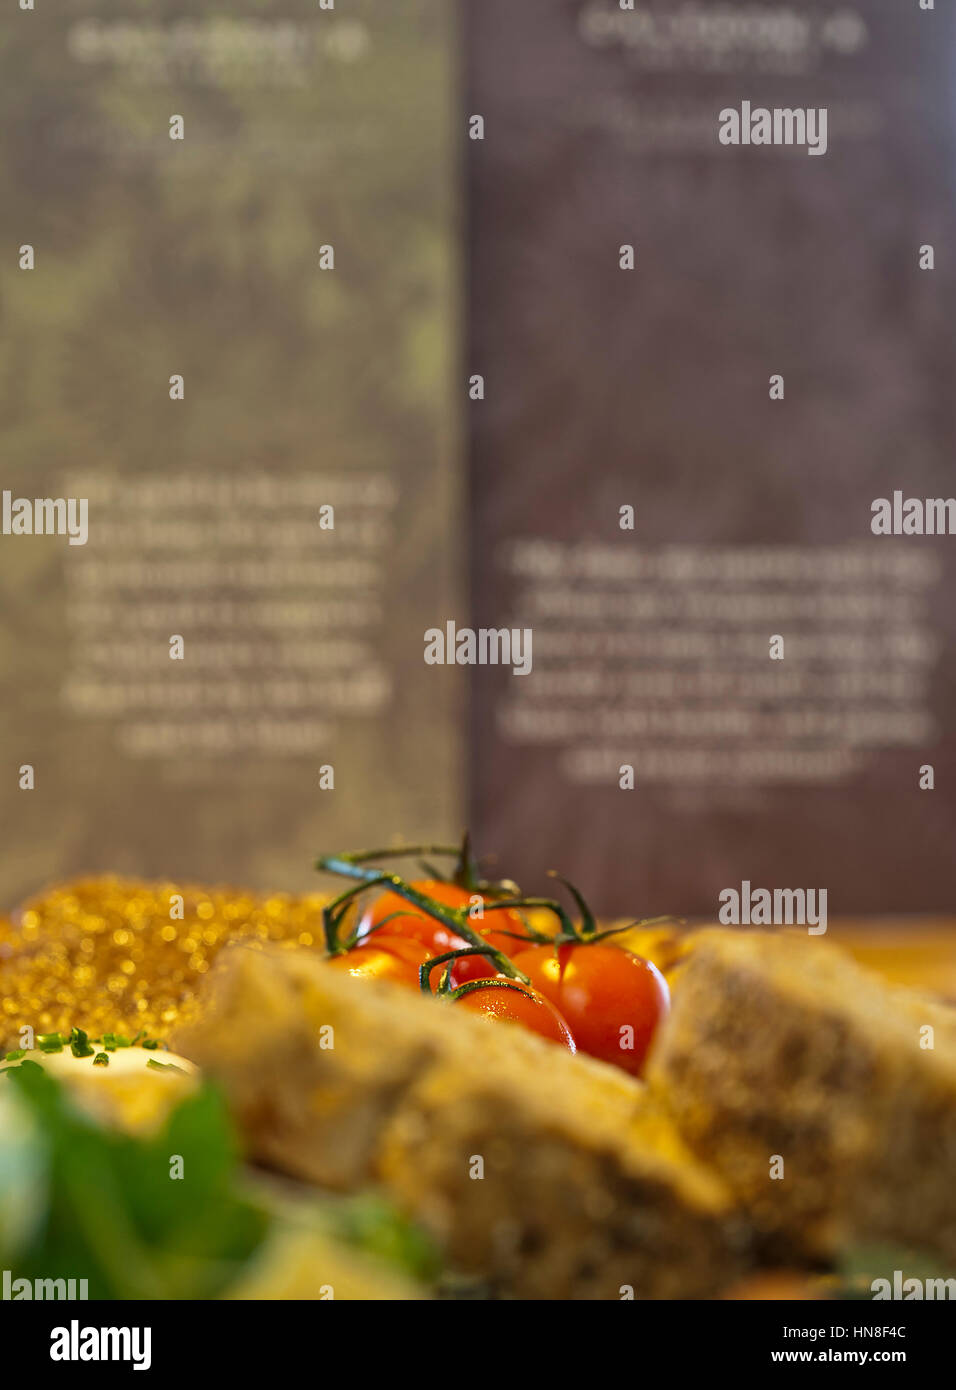 very shallow focus image of tomatoes in a meal Stock Photo